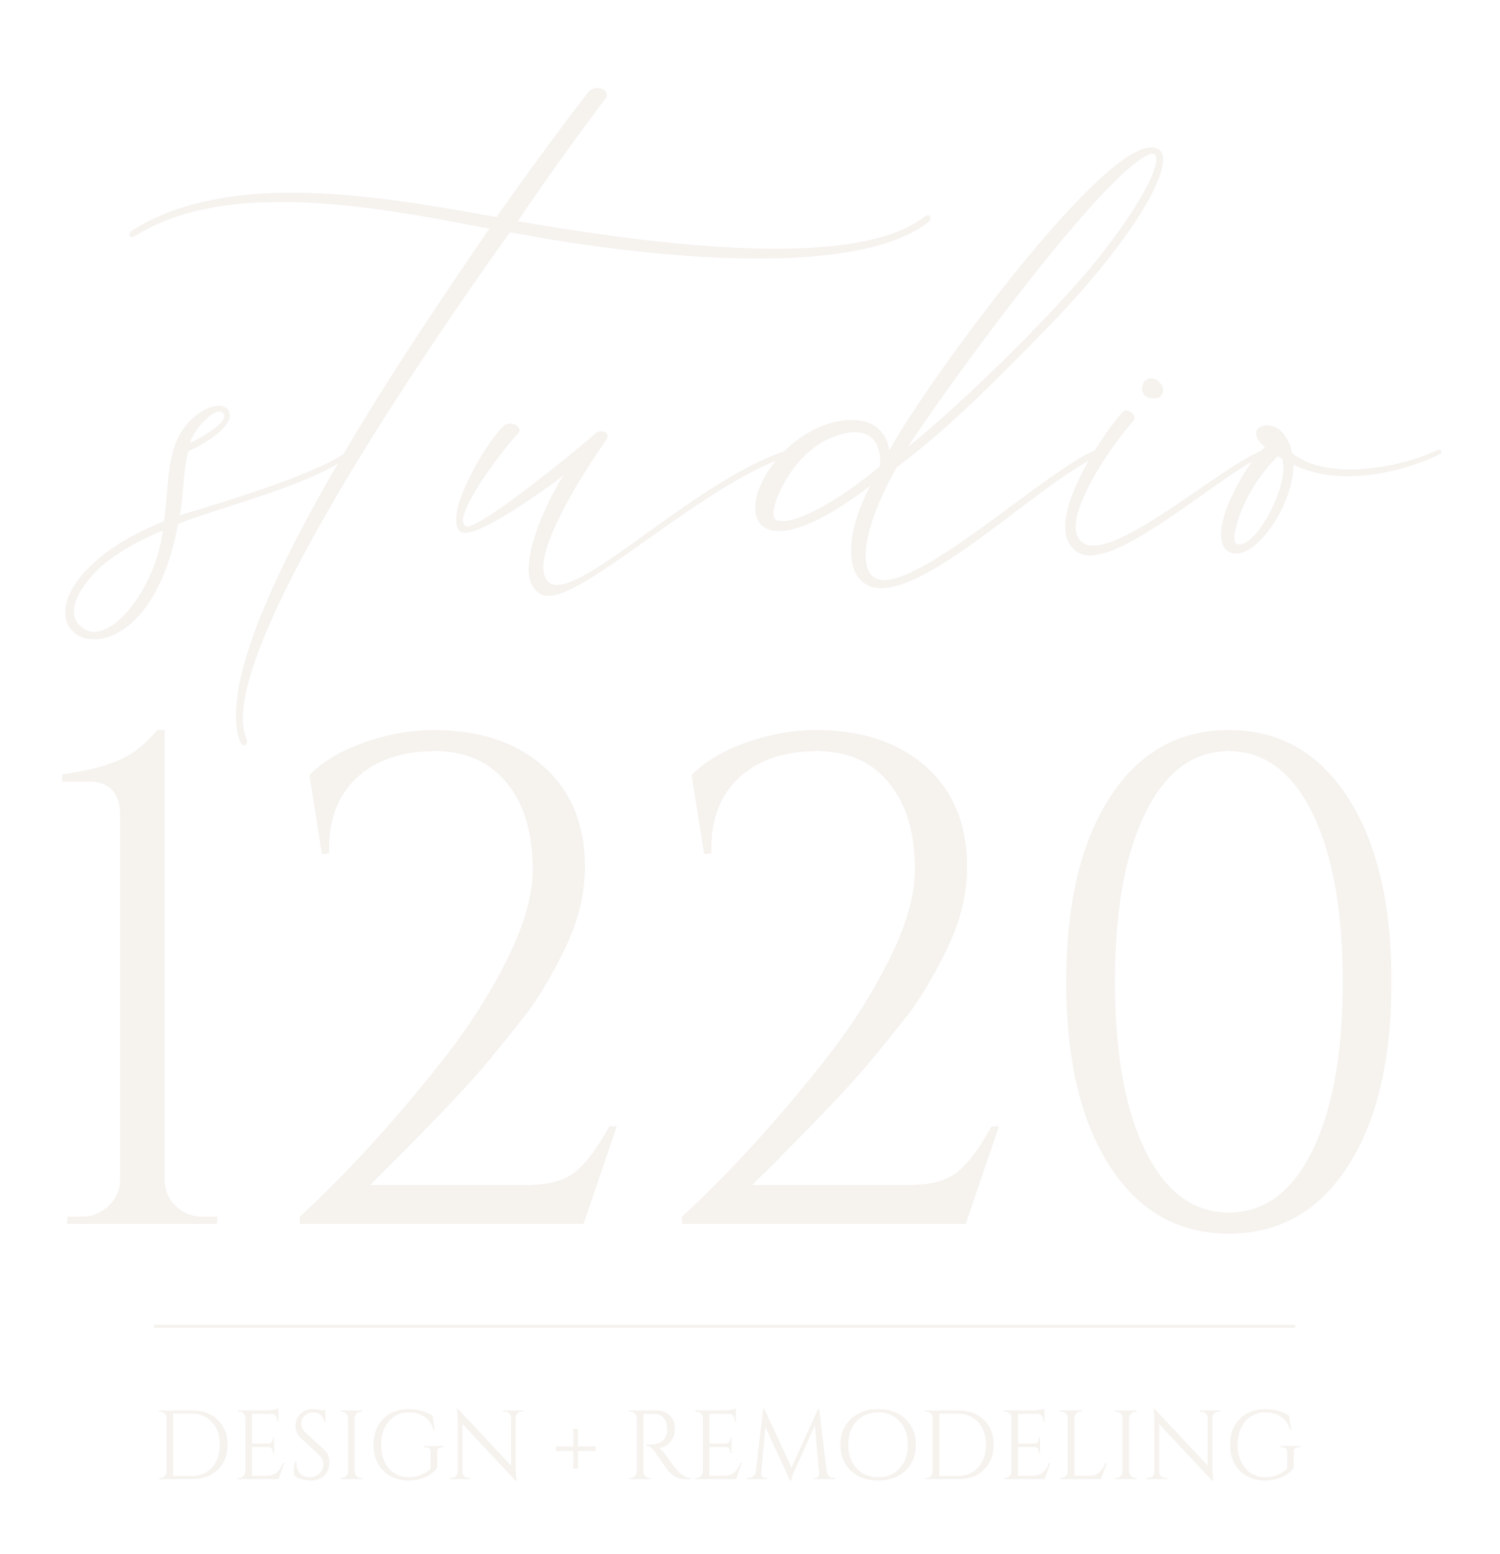 Studio 1220 Design and Remodeling